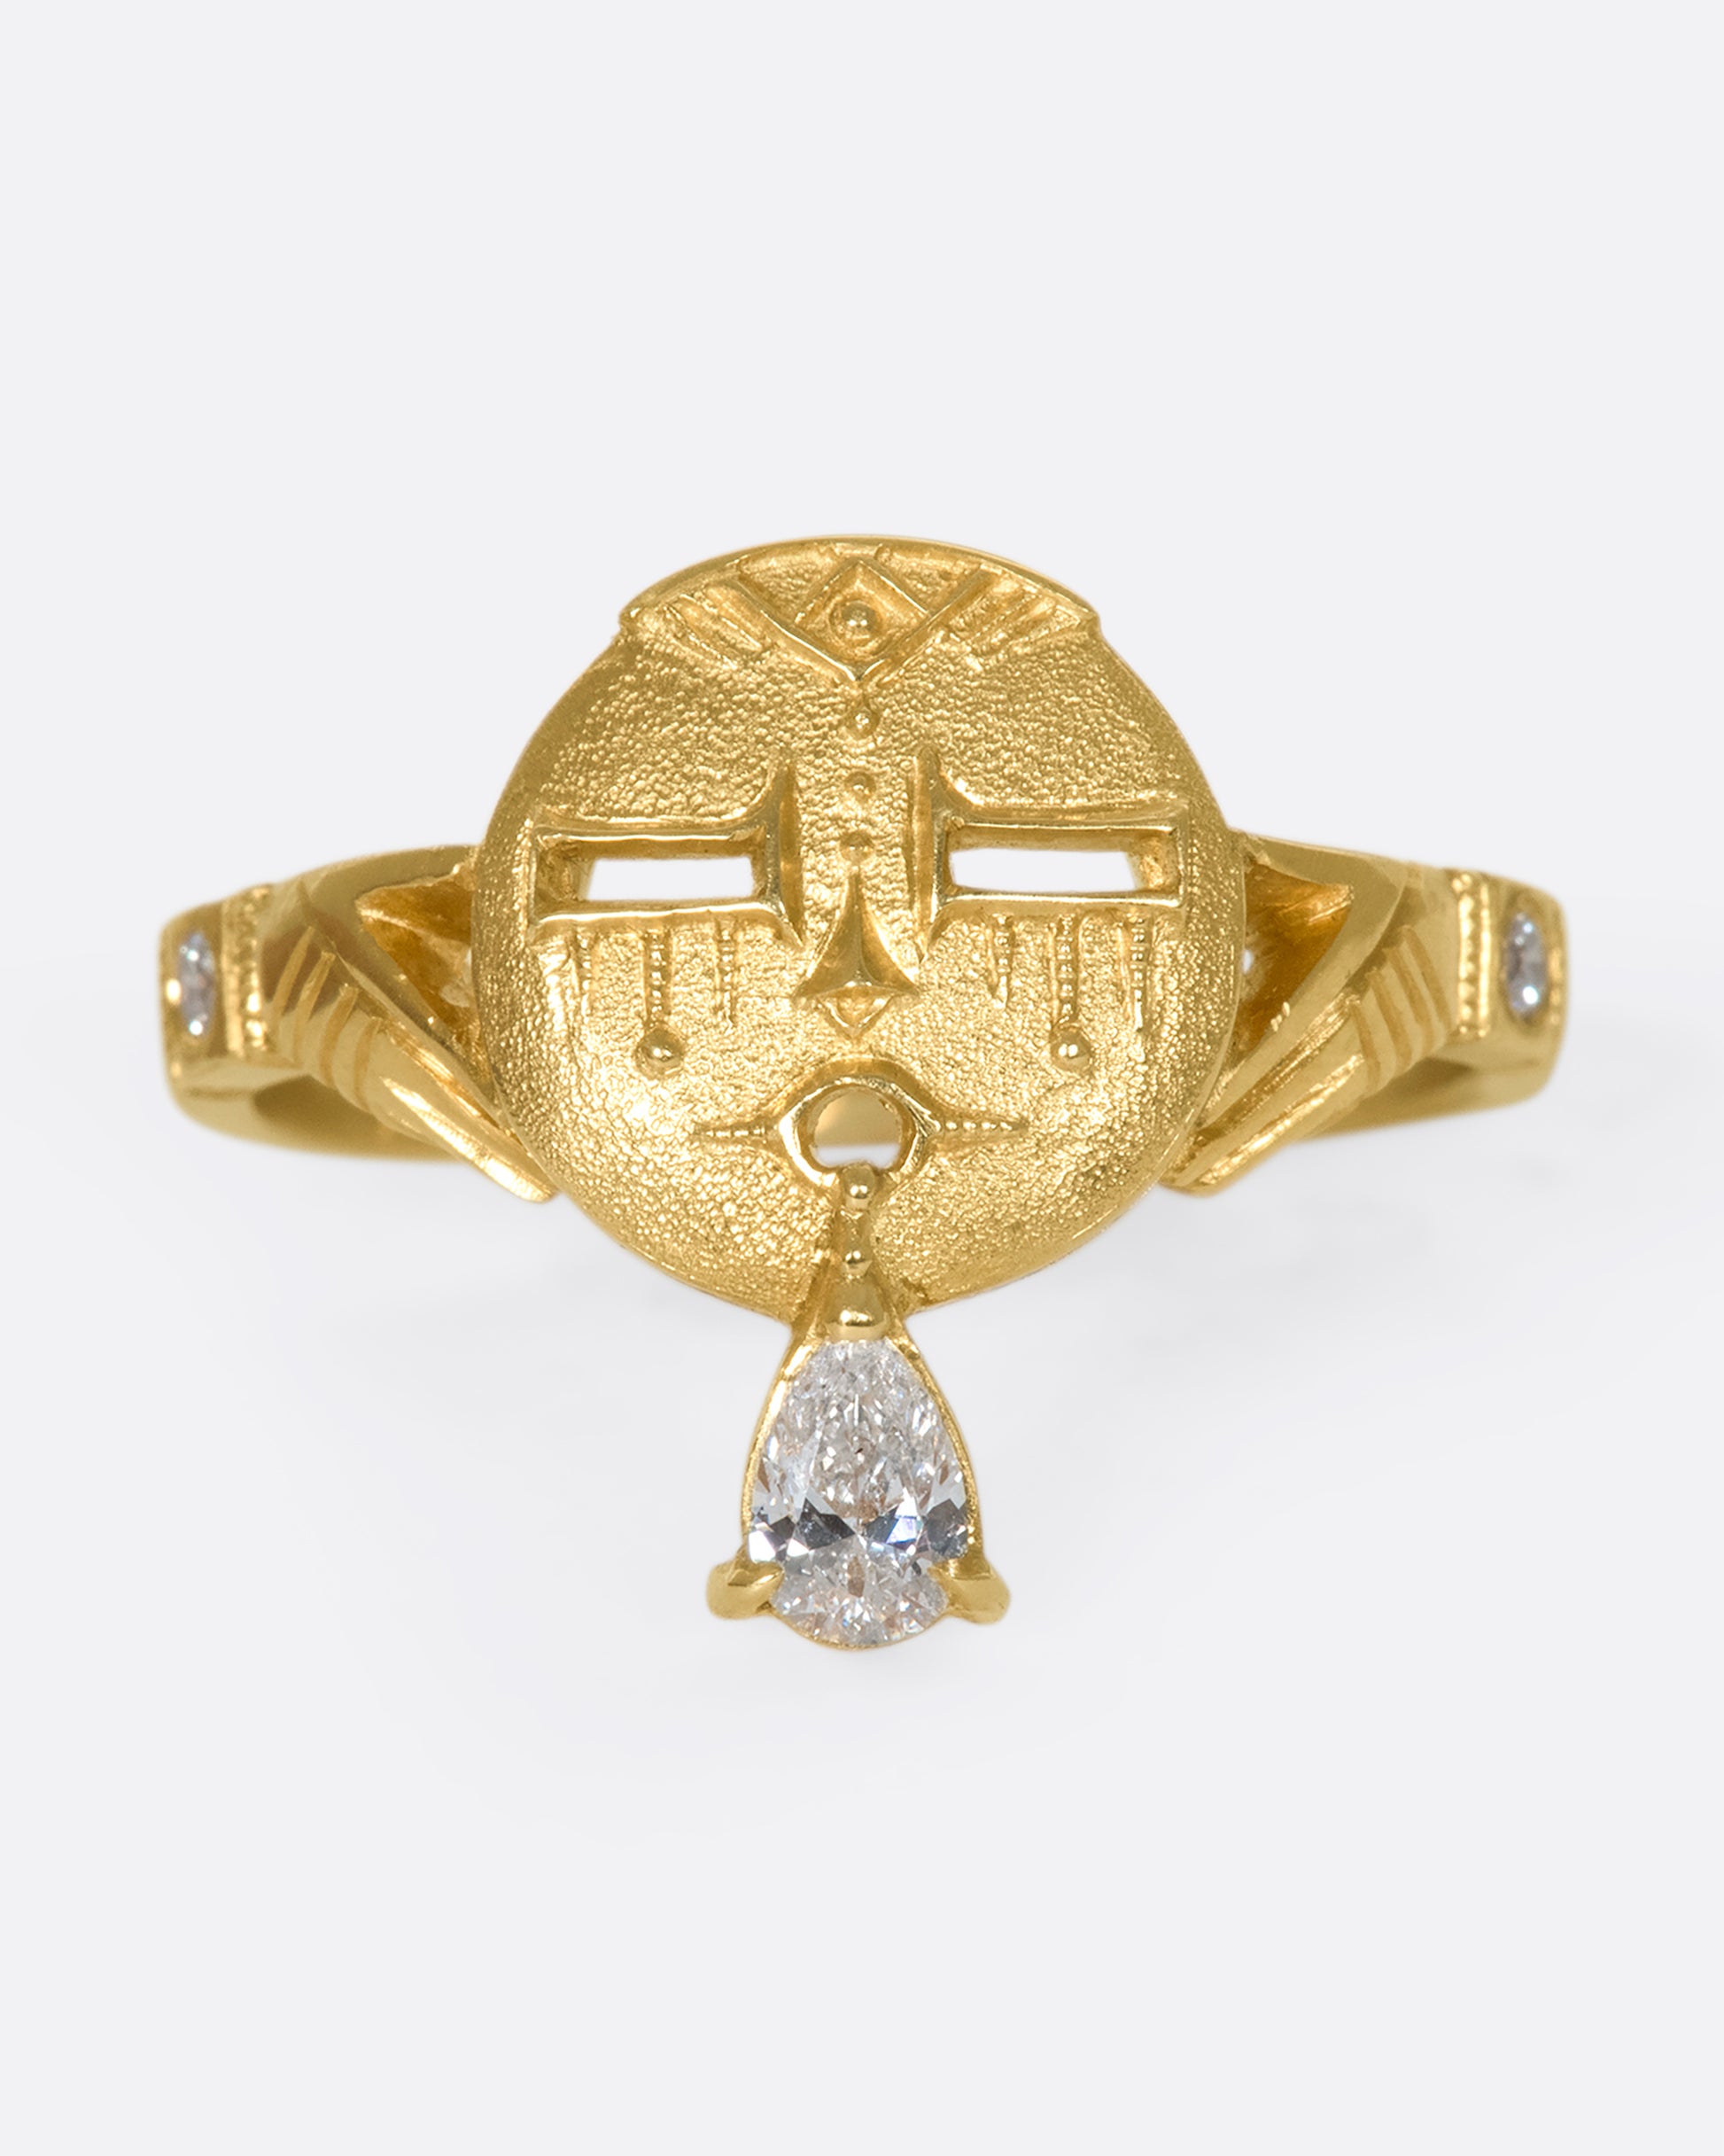 A close up of a gold ring with a face and a pear shaped diamond tongue.